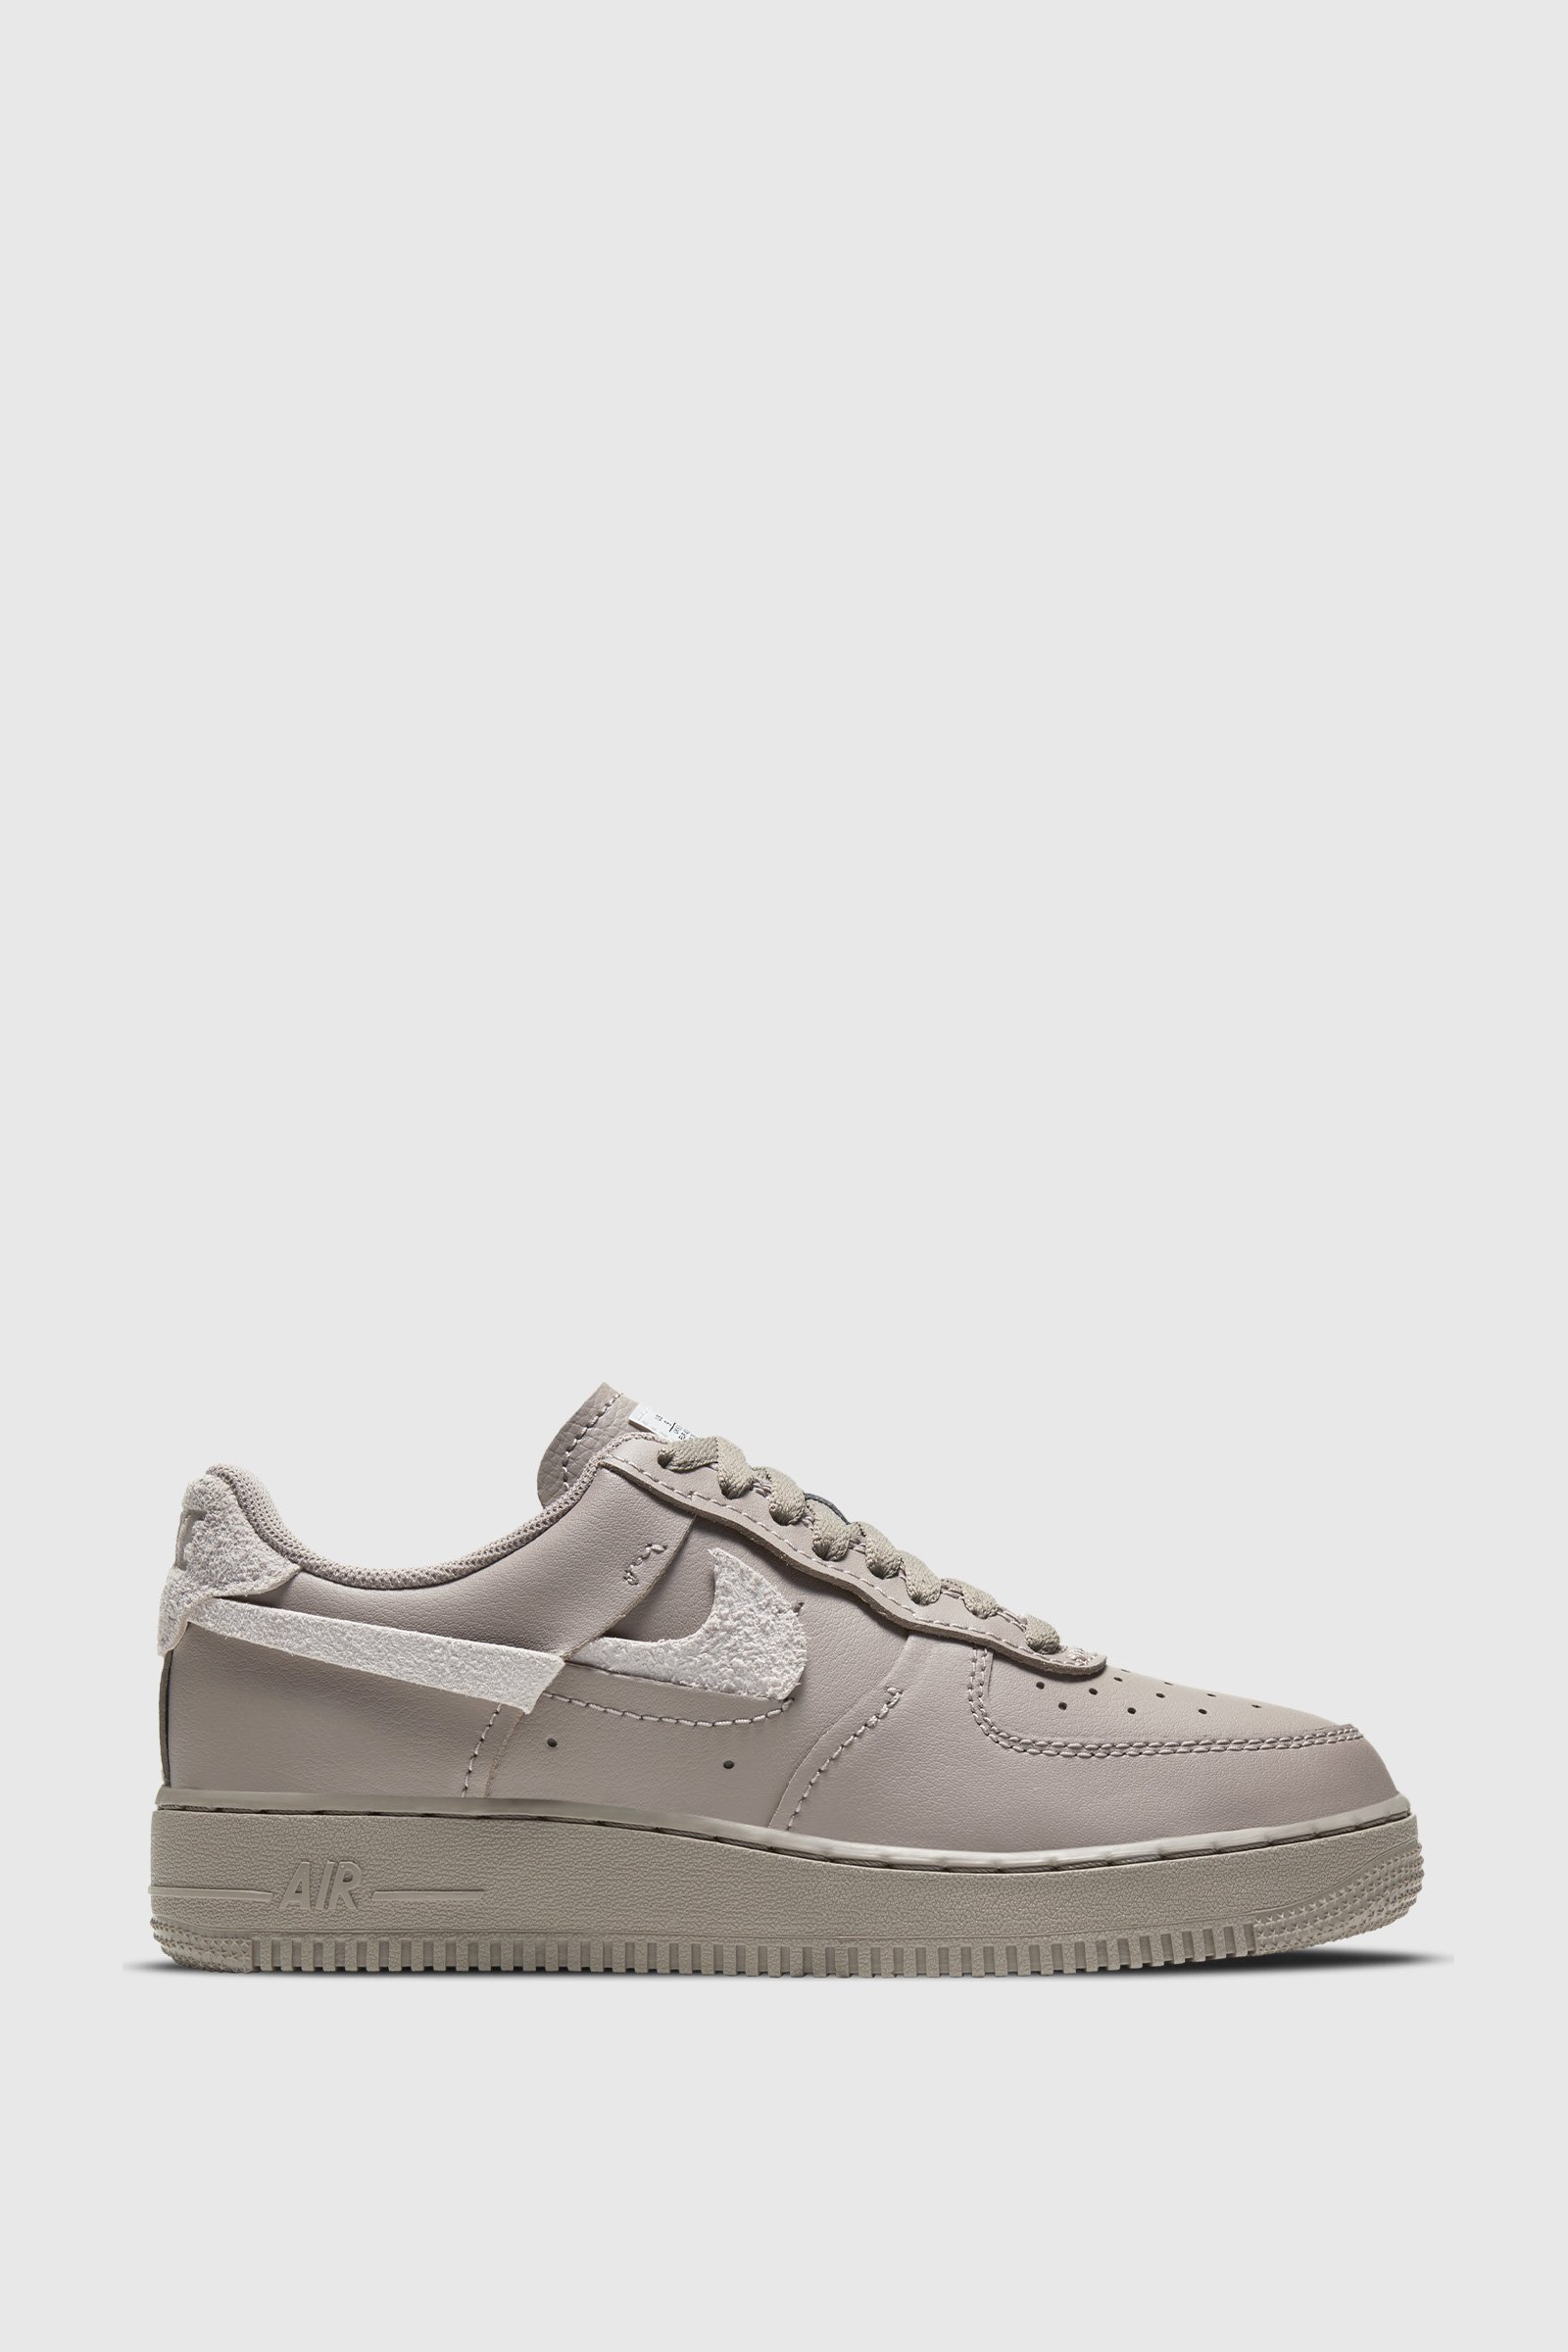 nike womans air force 1